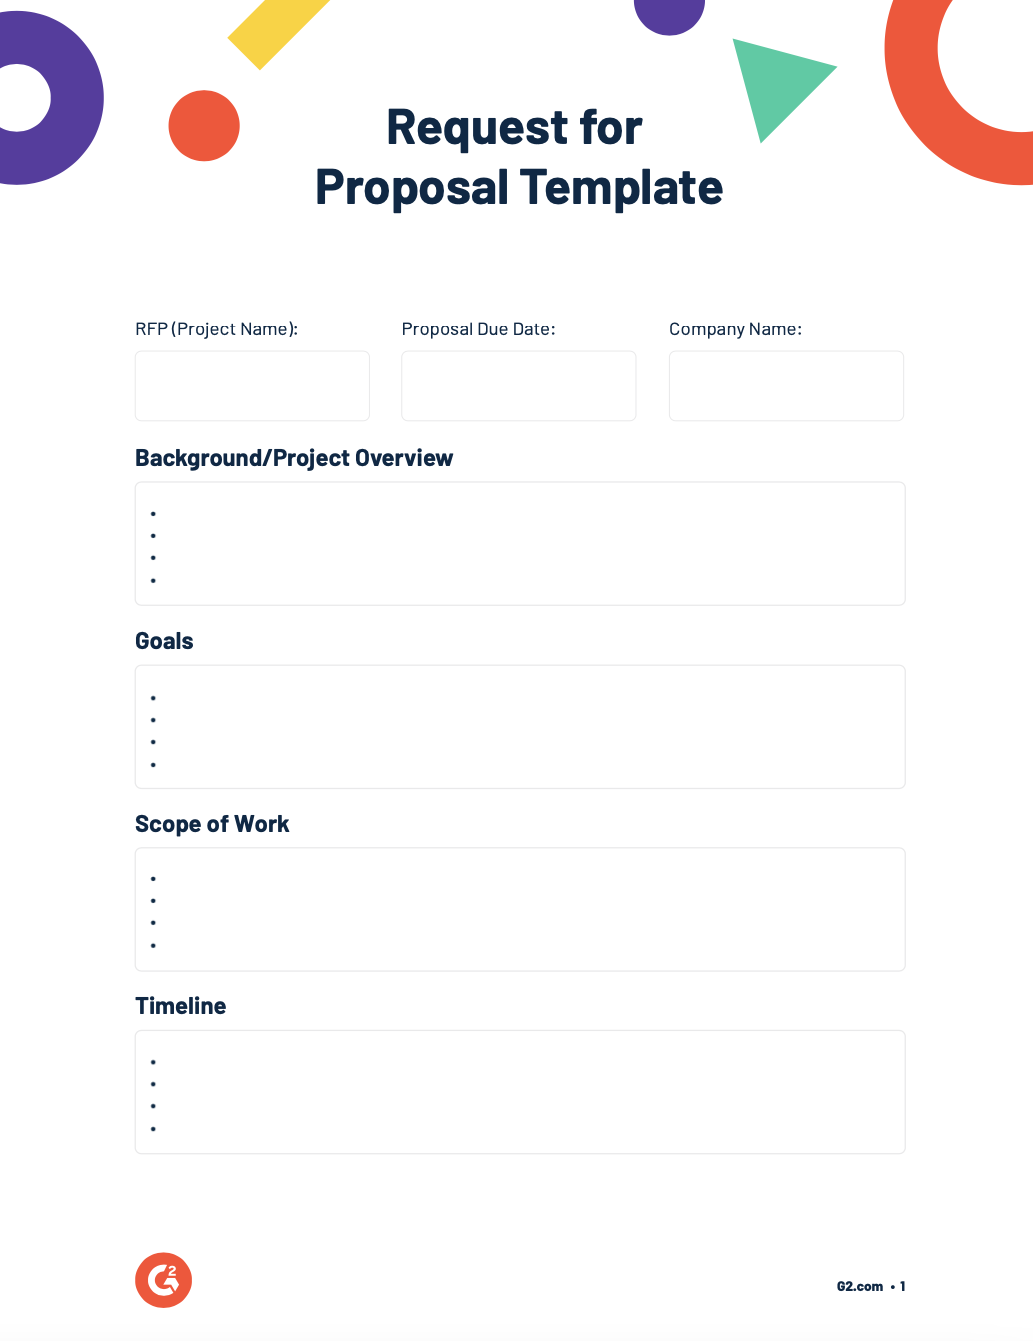 How to Write a Request for Proposal (RFP)   Free Template